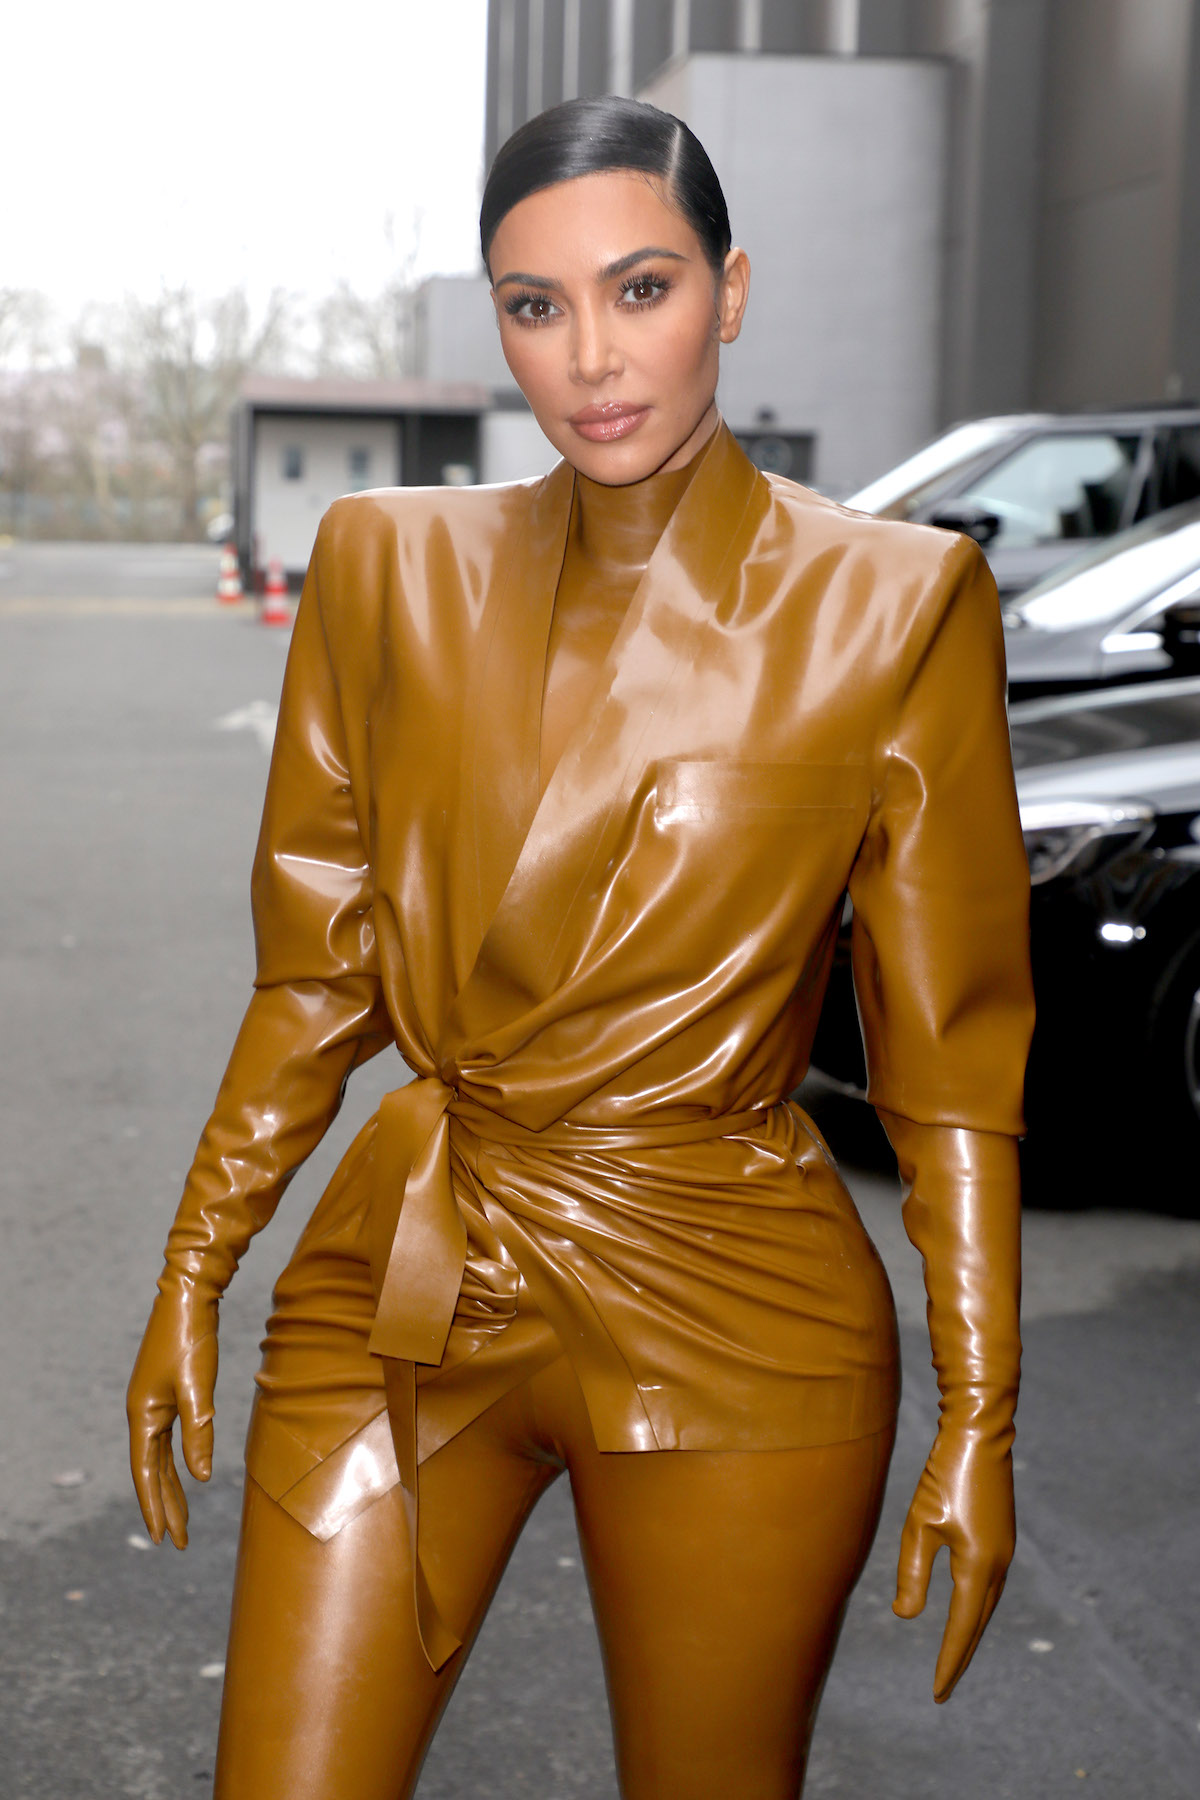 Kim Kardashian West steps out in a latex suit.